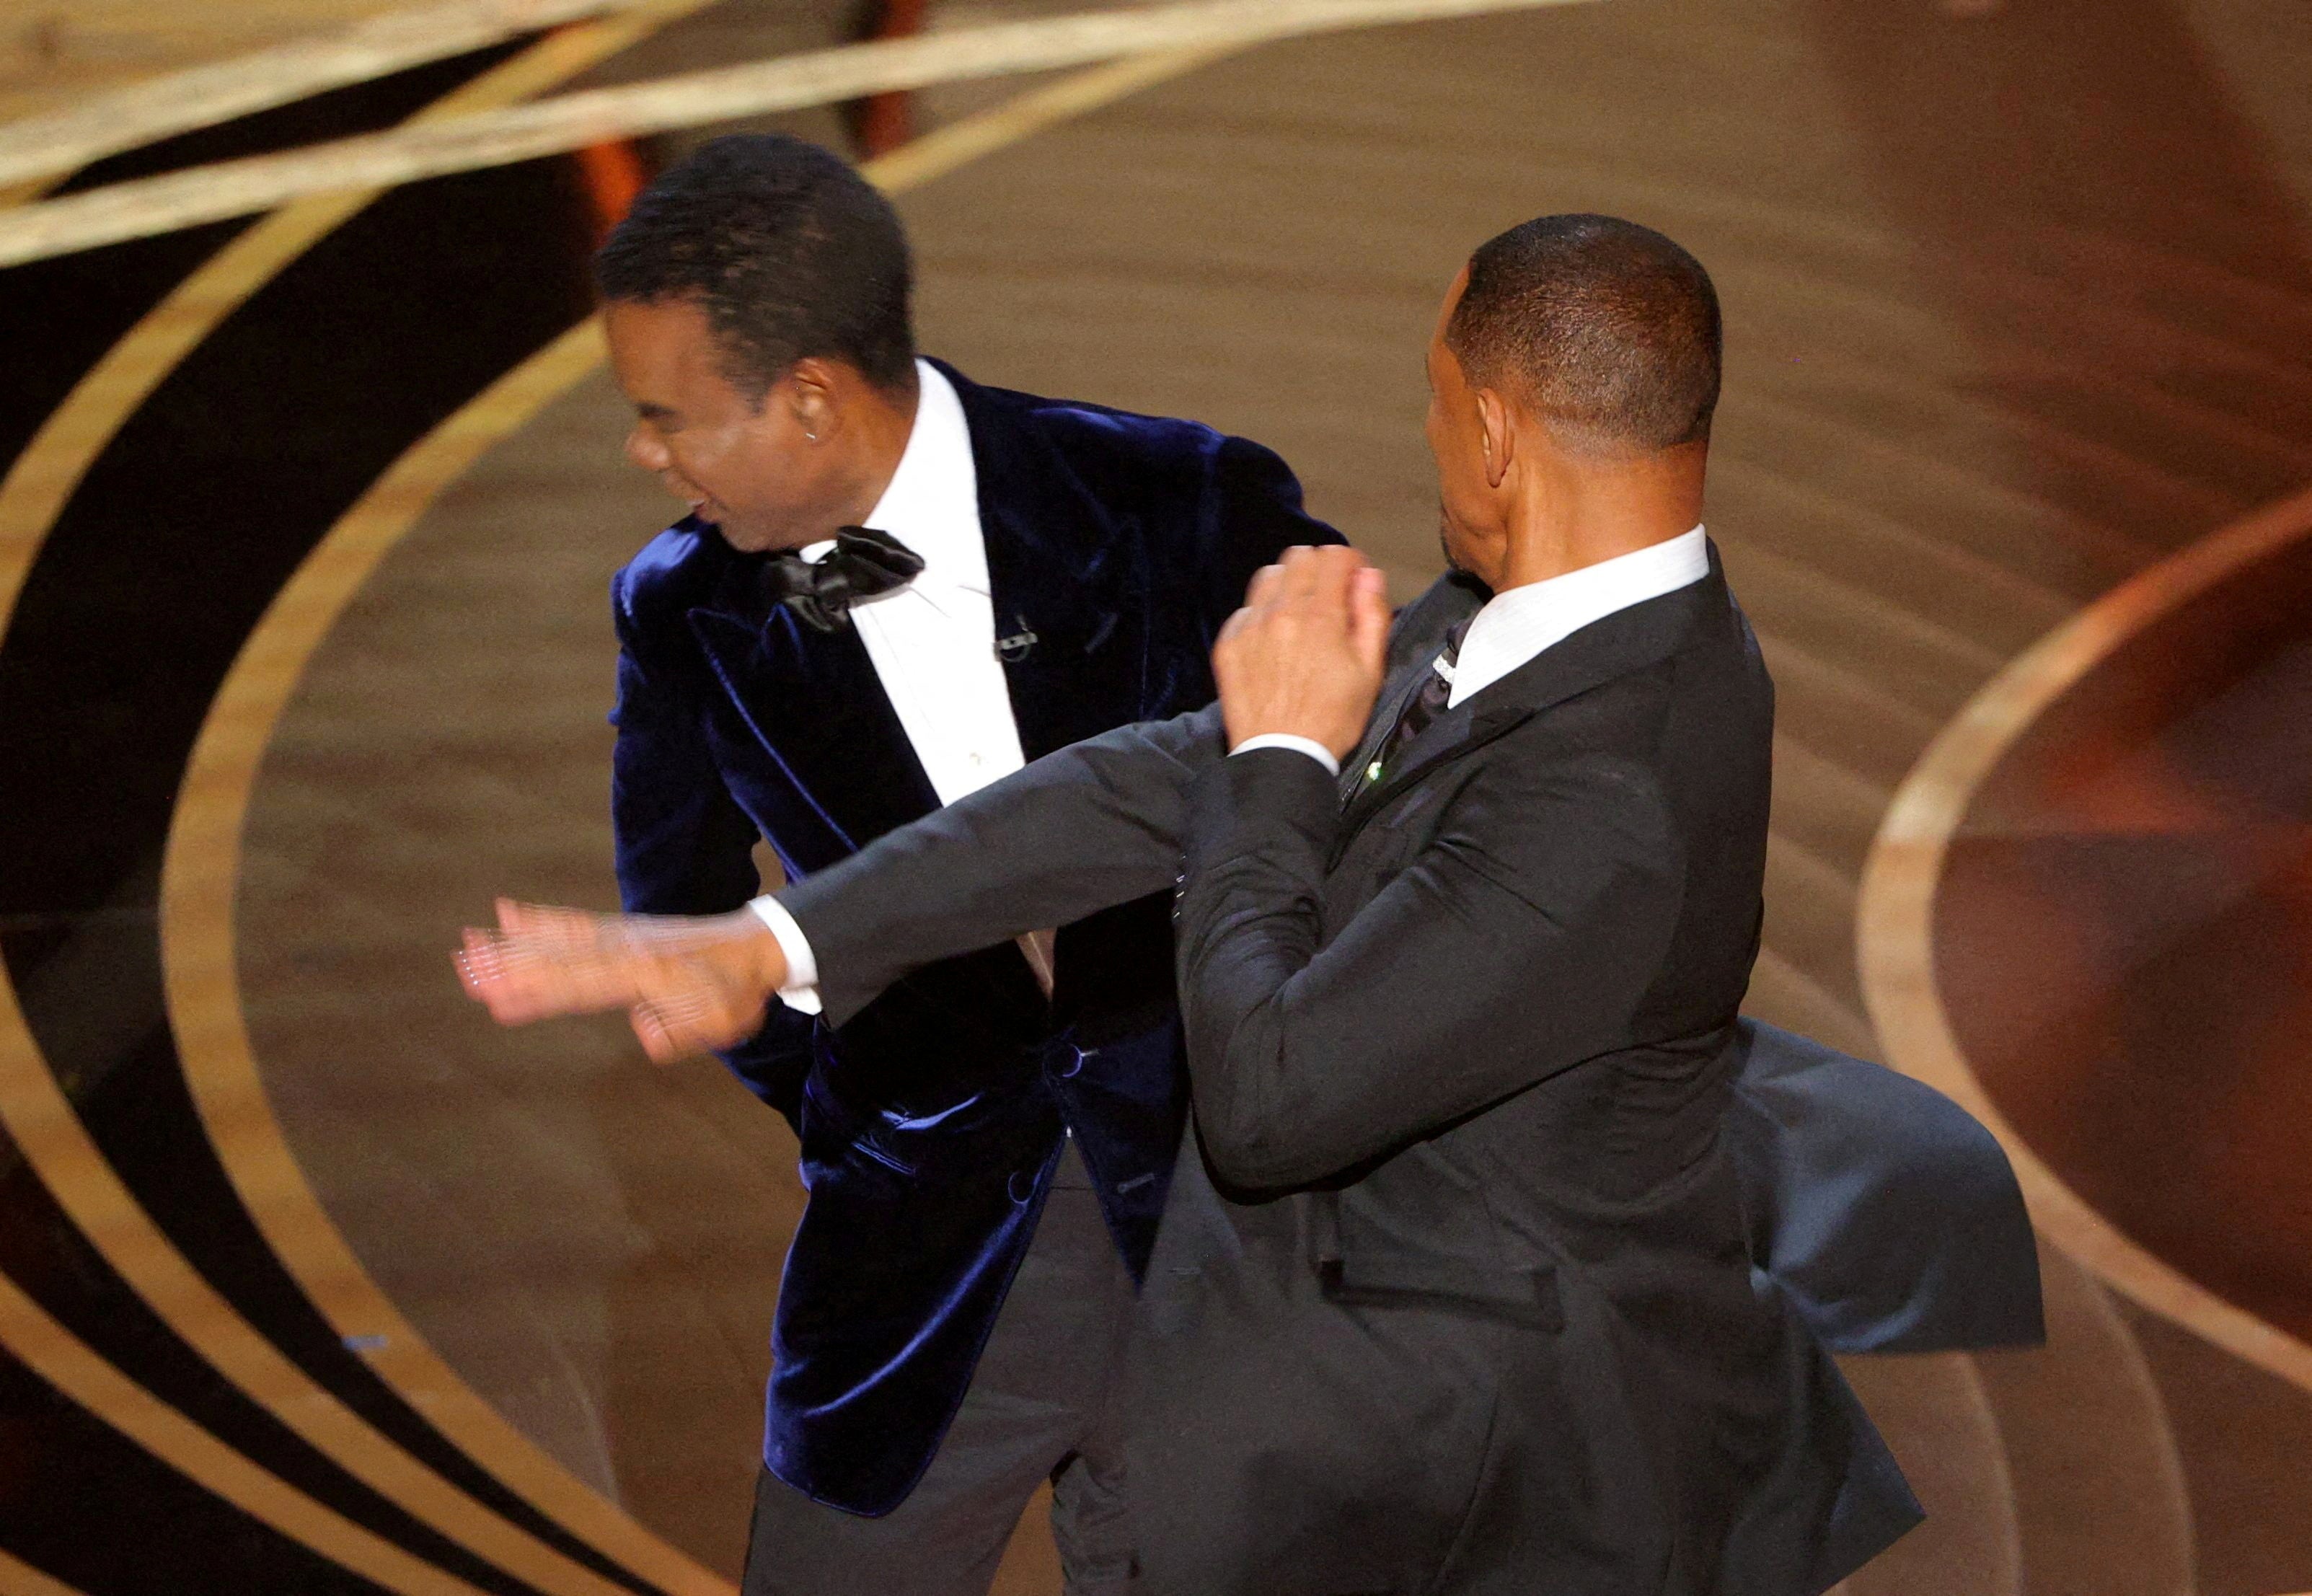 Will Smith strikes Chris Rock at the 2022 Oscars in the ‘slap heard around the world’